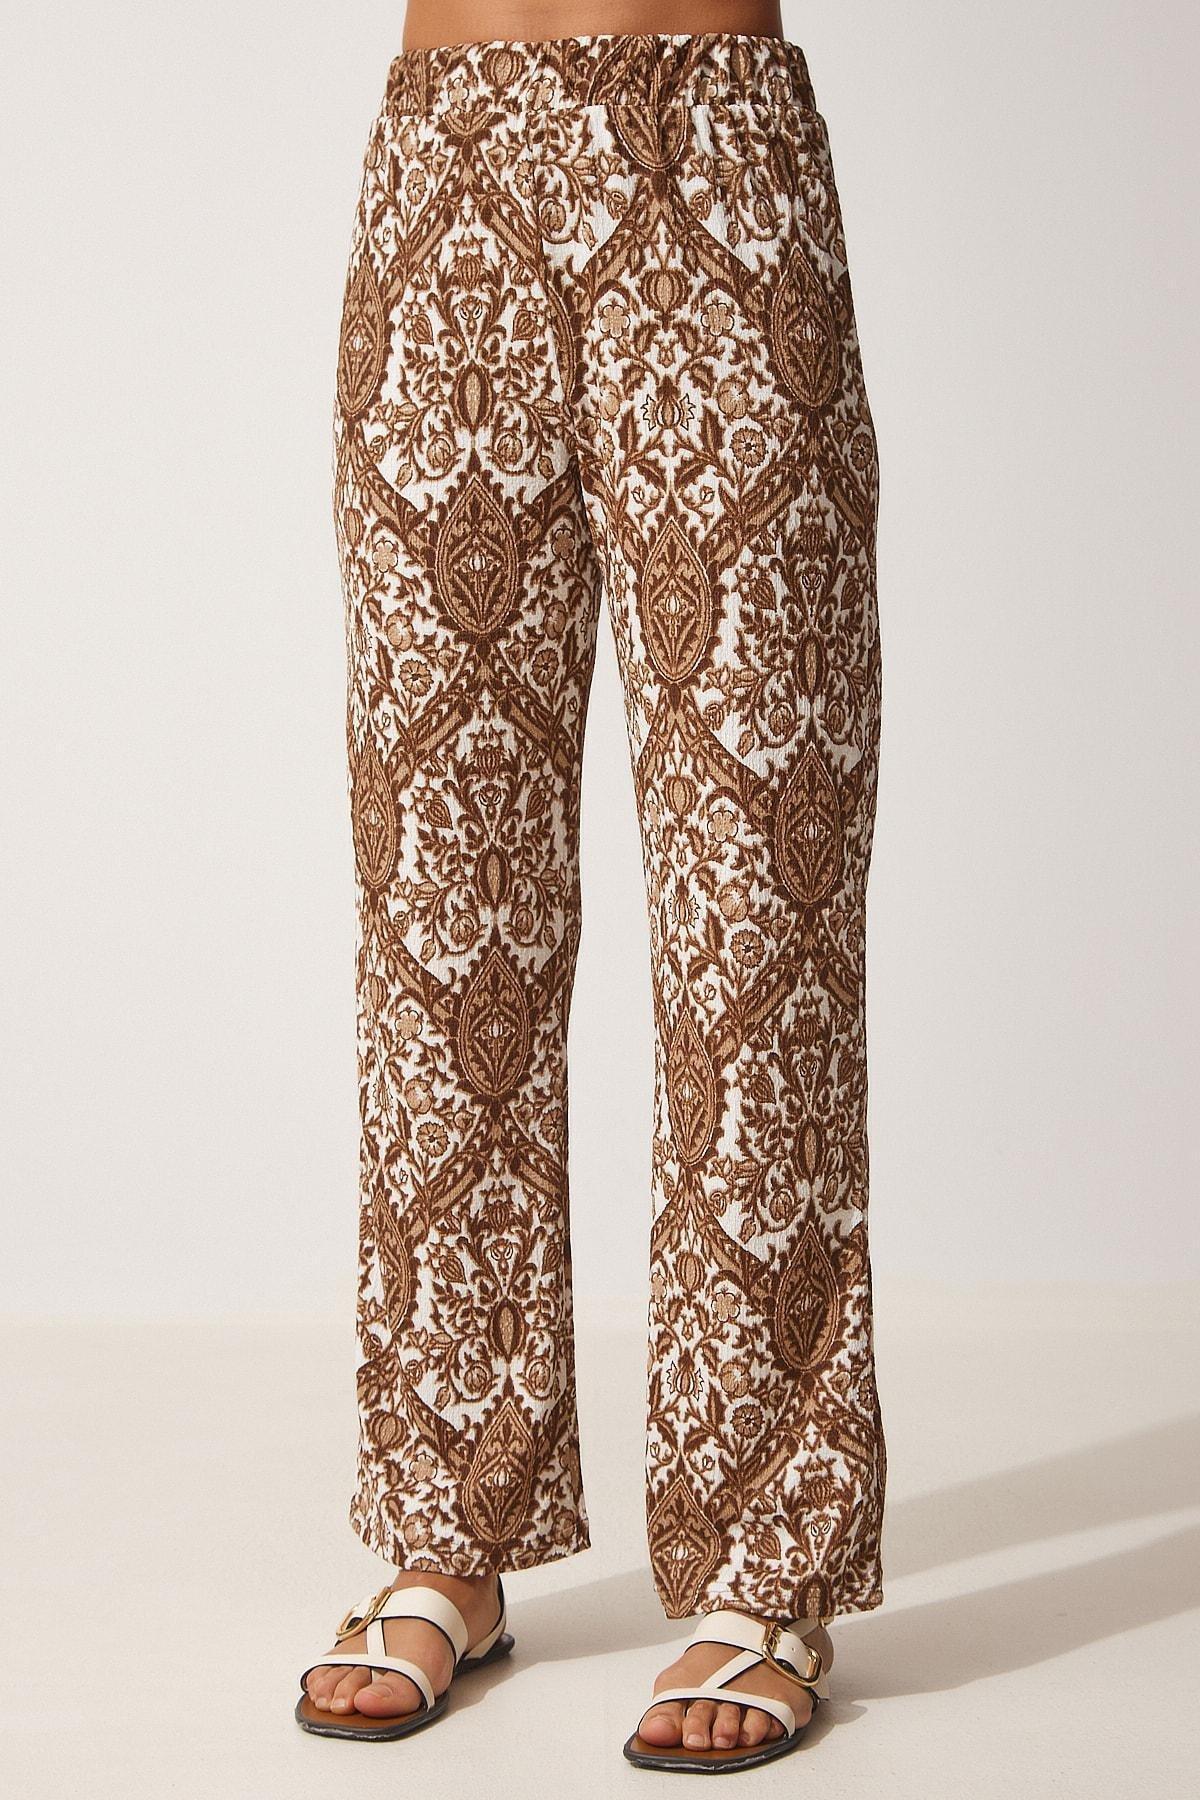 Happiness Istanbul - Brown Patterned Summer Loose Palazzo Pants